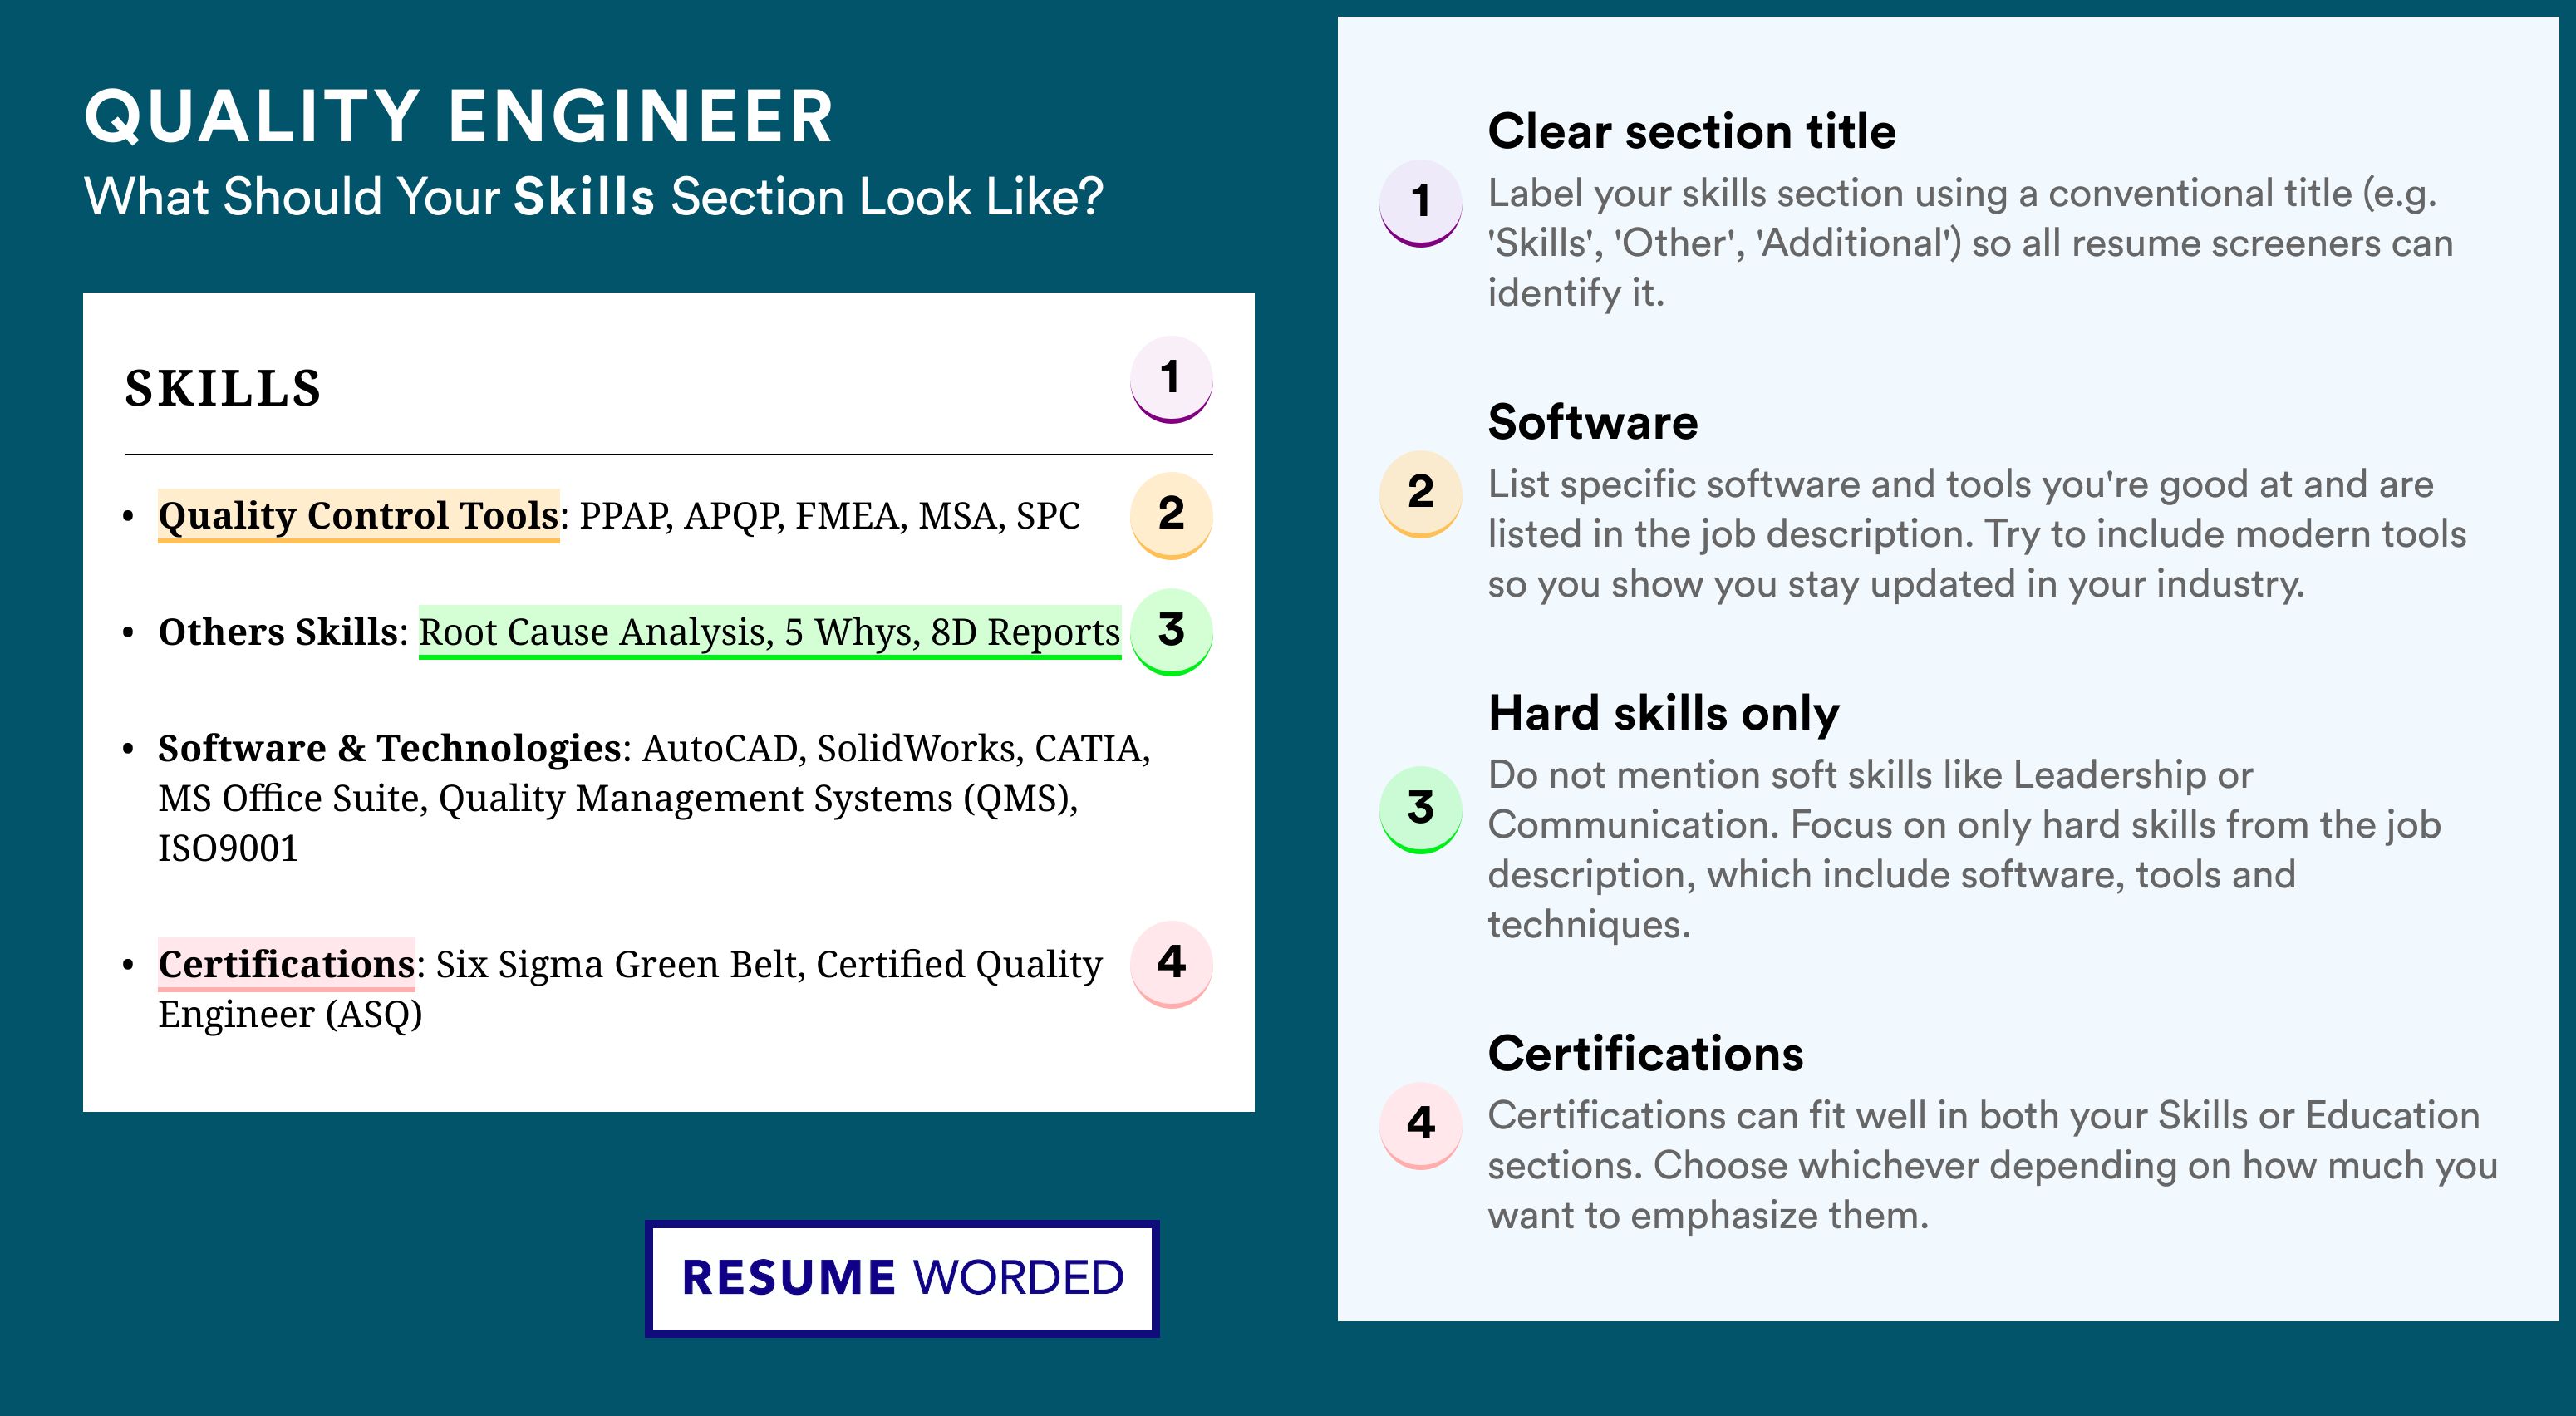 How To Write Your Skills Section - Quality Engineer Roles